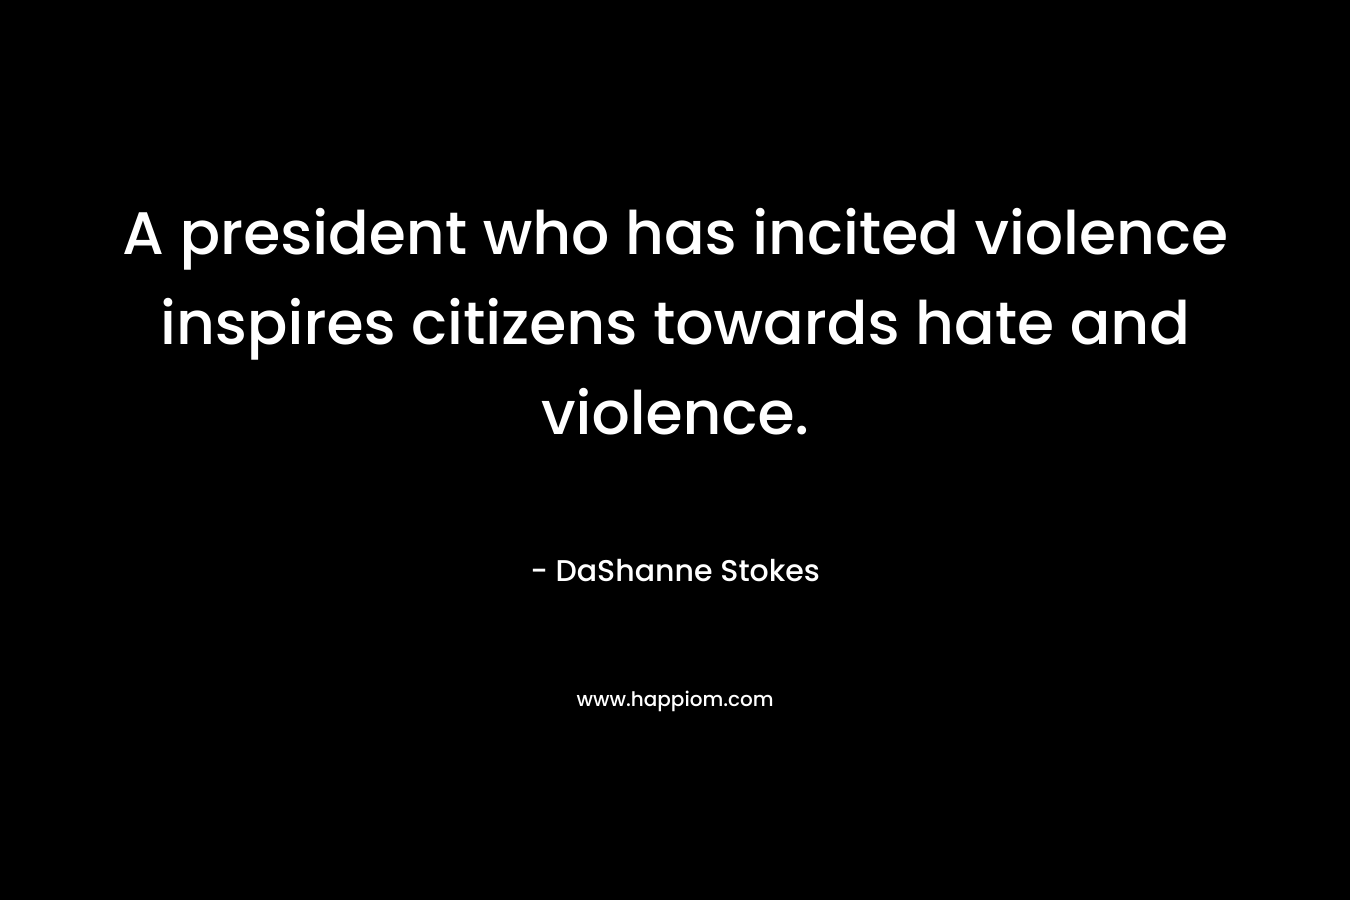 A president who has incited violence inspires citizens towards hate and violence.